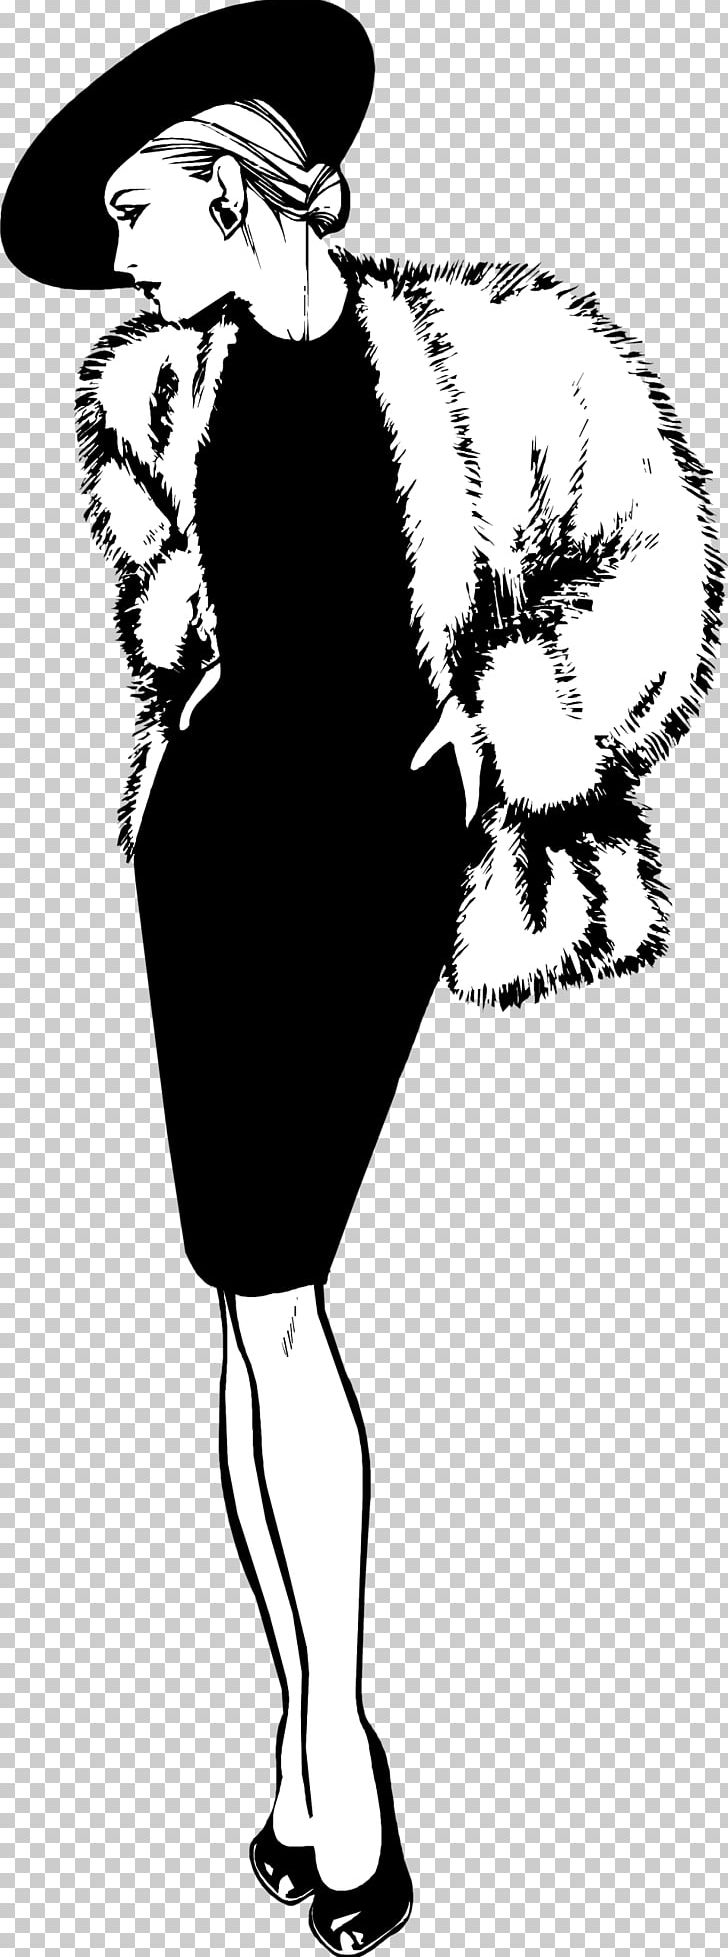 Hat Girls In Furs (Portrait Of A Woman) Fur Clothing PNG, Clipart, Black And White, Clothing, Coat, Coat Clipart, Fashion Illustration Free PNG Download